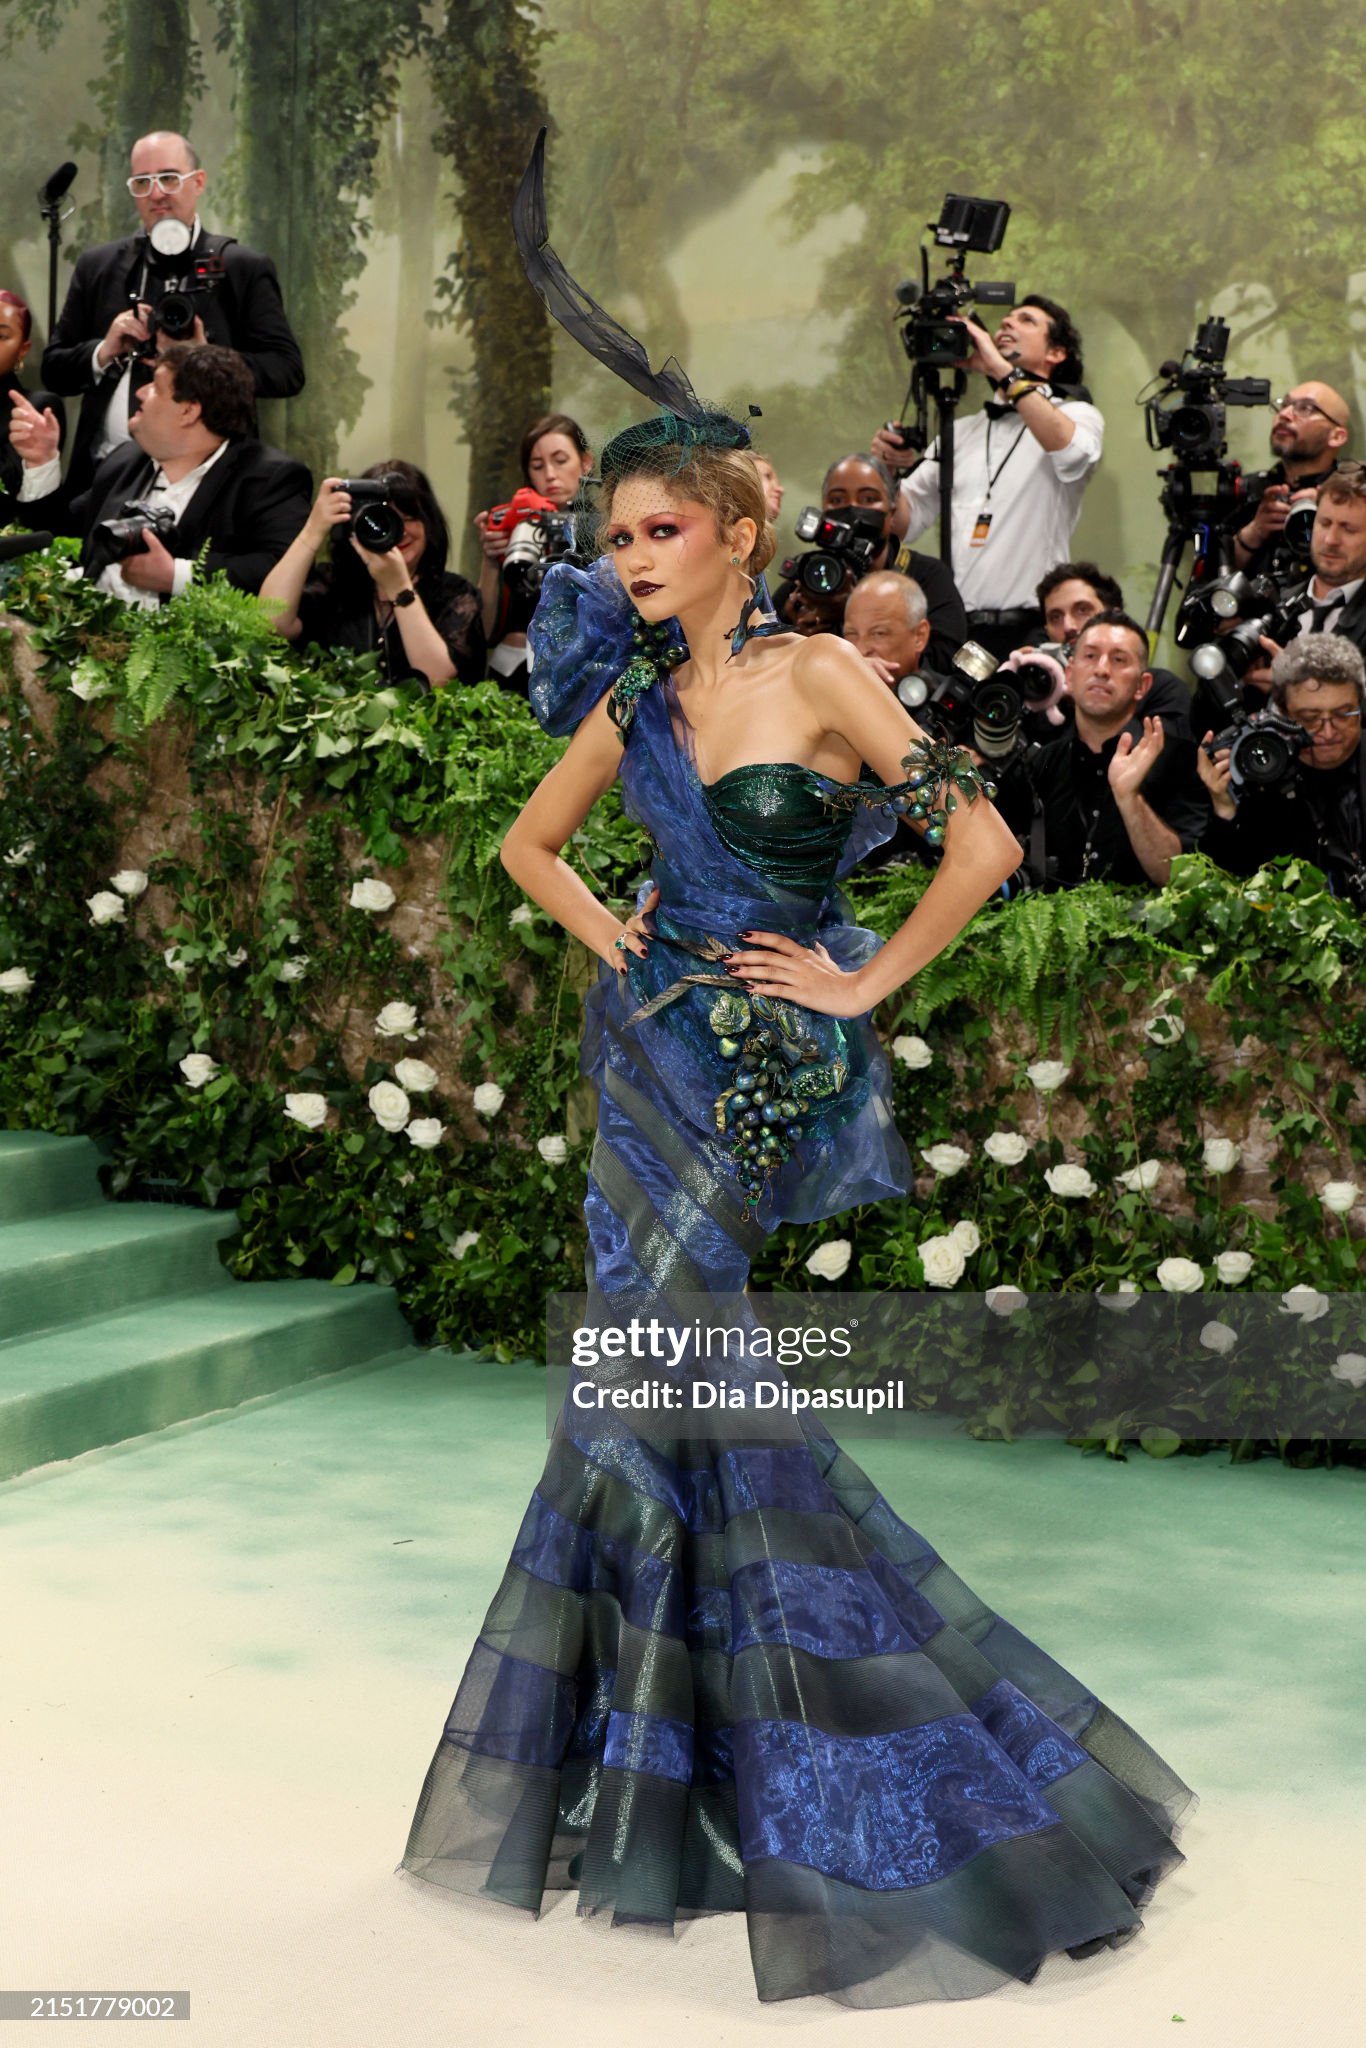 gettyimages-2151779002-2048x2048.jpg